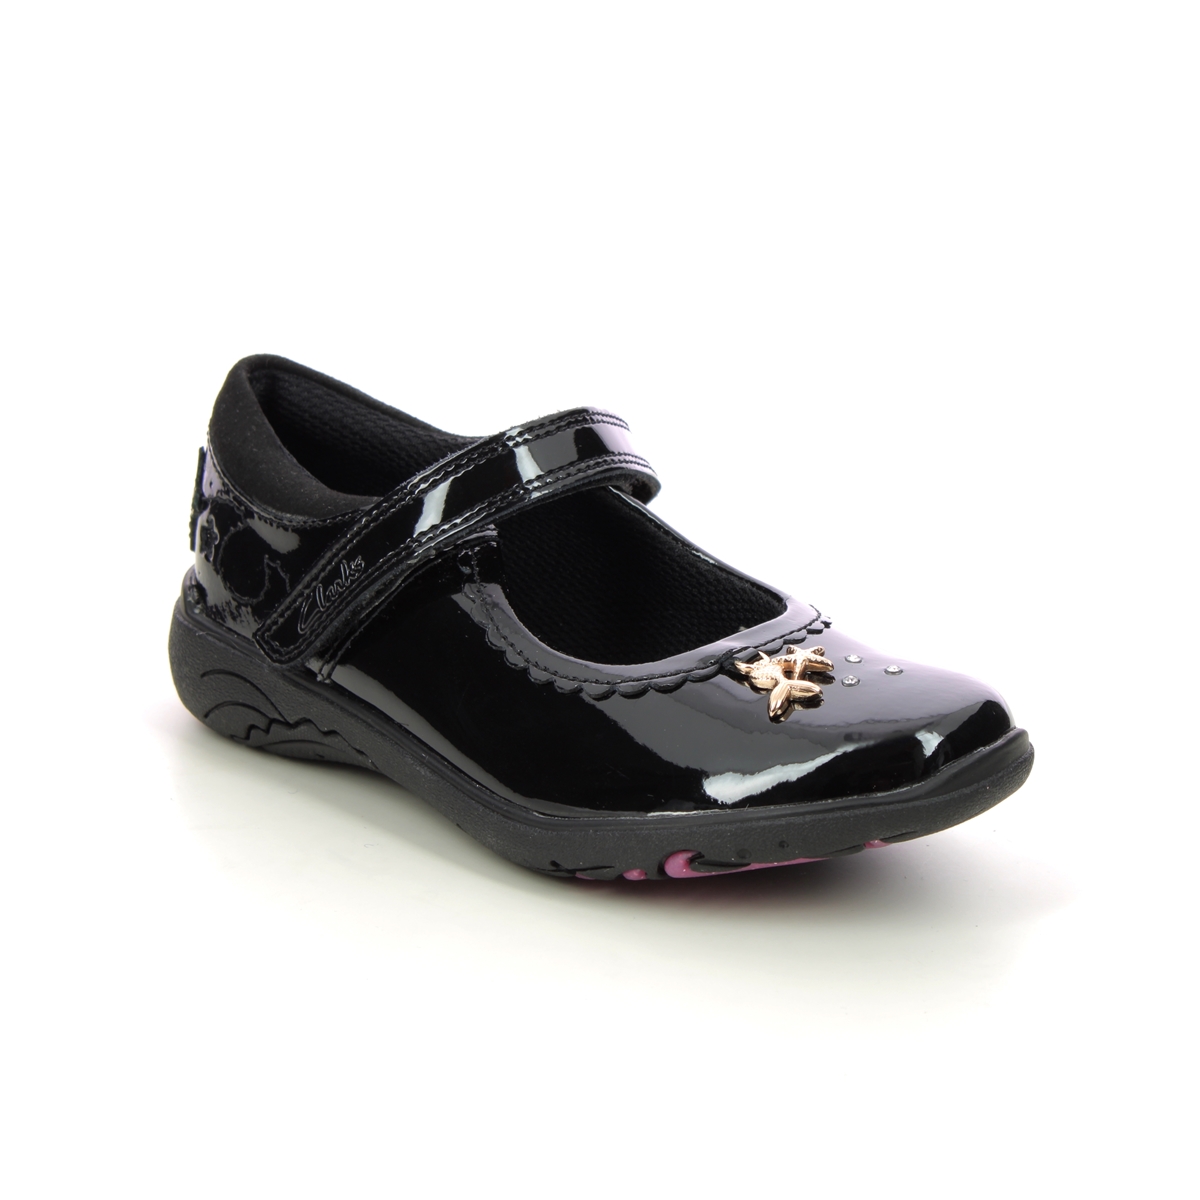 Clarks Relda Sea K Mary Jane Black Patent Kids Girls School Shoes 722418H In Size 13.5 In Plain Black Patent H Width Fitting Extra Wide For School For